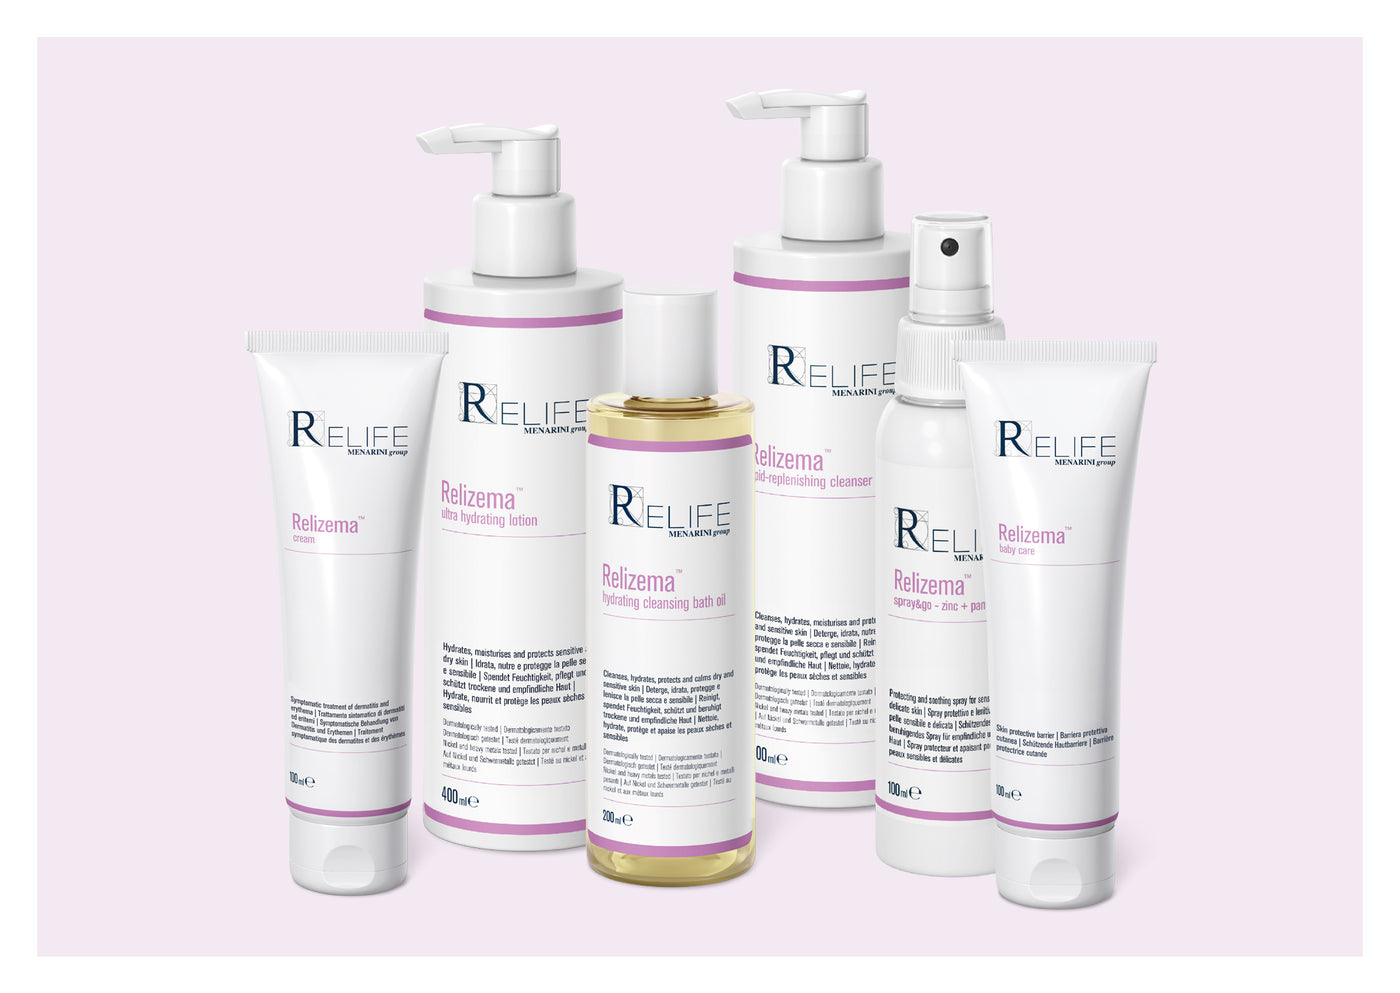 Relife Skincare - 15% Discount on Relizema